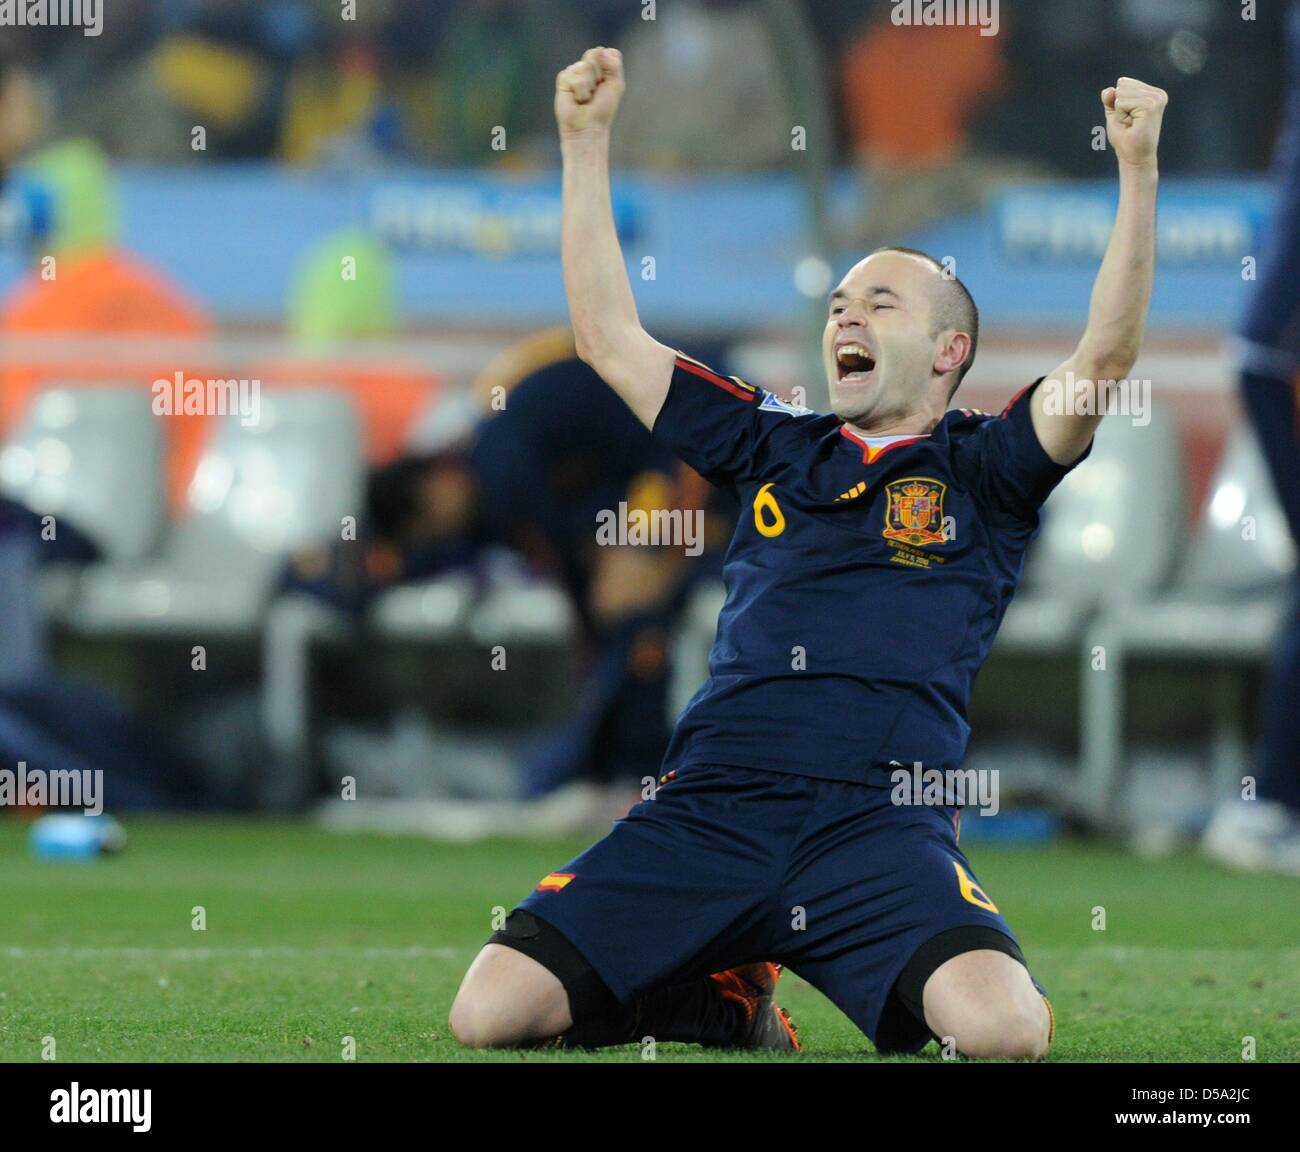 Spain's Andres Iniesta celebrates scoring the 1-0 winning goal during the 2010 FIFA World Cup final match between the Netherlands and Spain at Soccer City Stadium in Johannesburg, South Africa 11 July 2010. Photo: Marcus Brandt dpa - Please refer to http://dpaq.de/FIFA-WM2010-TC  +++(c) dpa - Bildfunk+++ Stock Photo